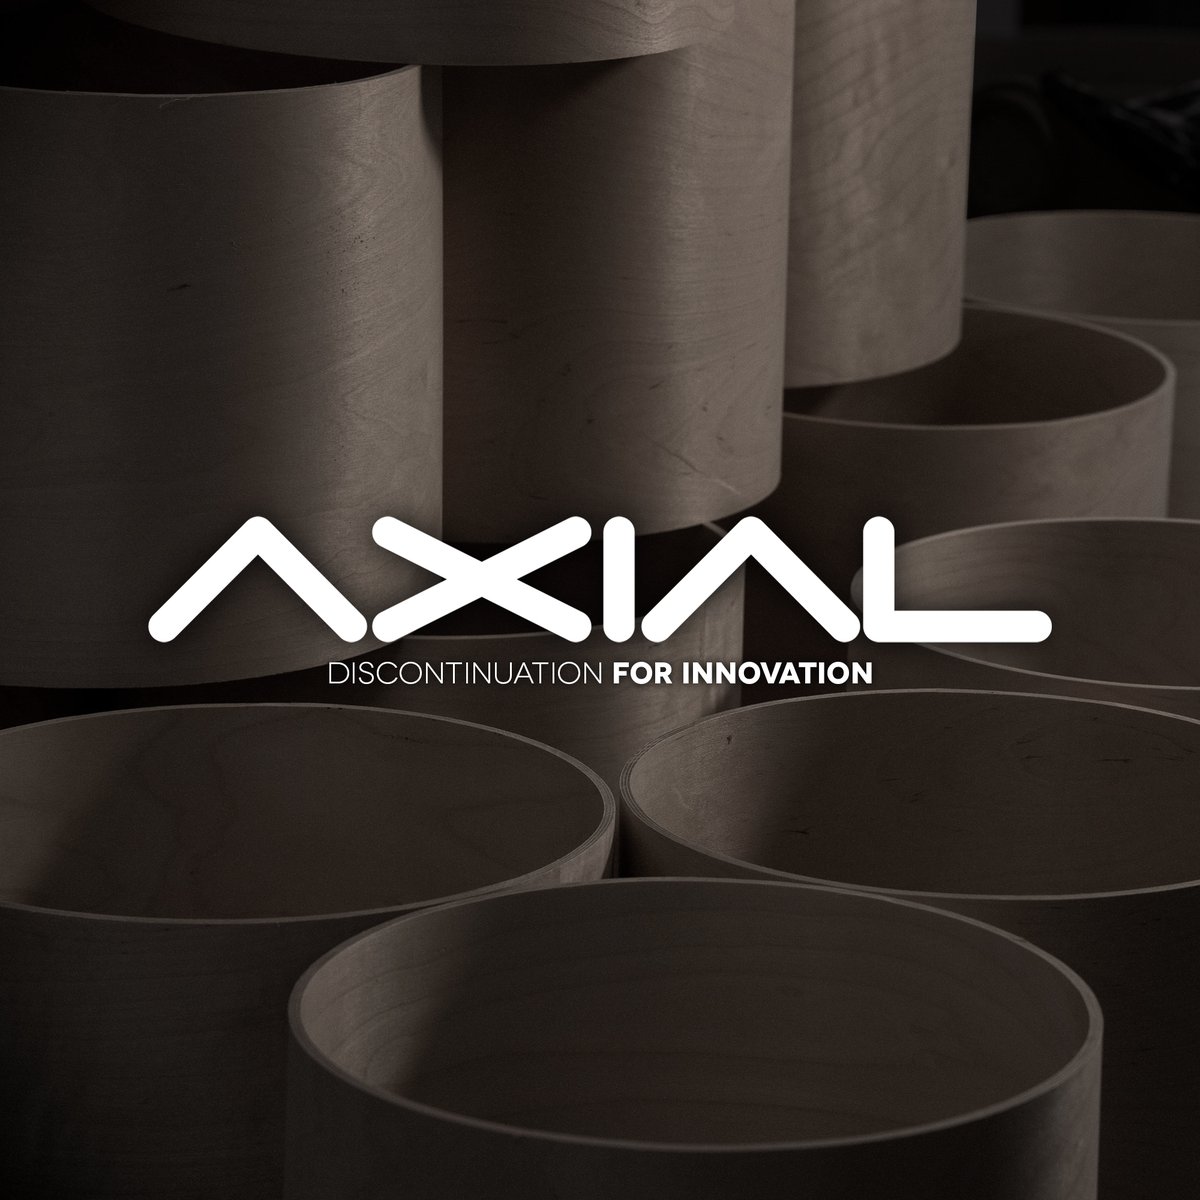 Discontinuation of Axial Pipe Band Drums for Innovation Visit our website for the full statement: britishdrumco.com/post/discontin…